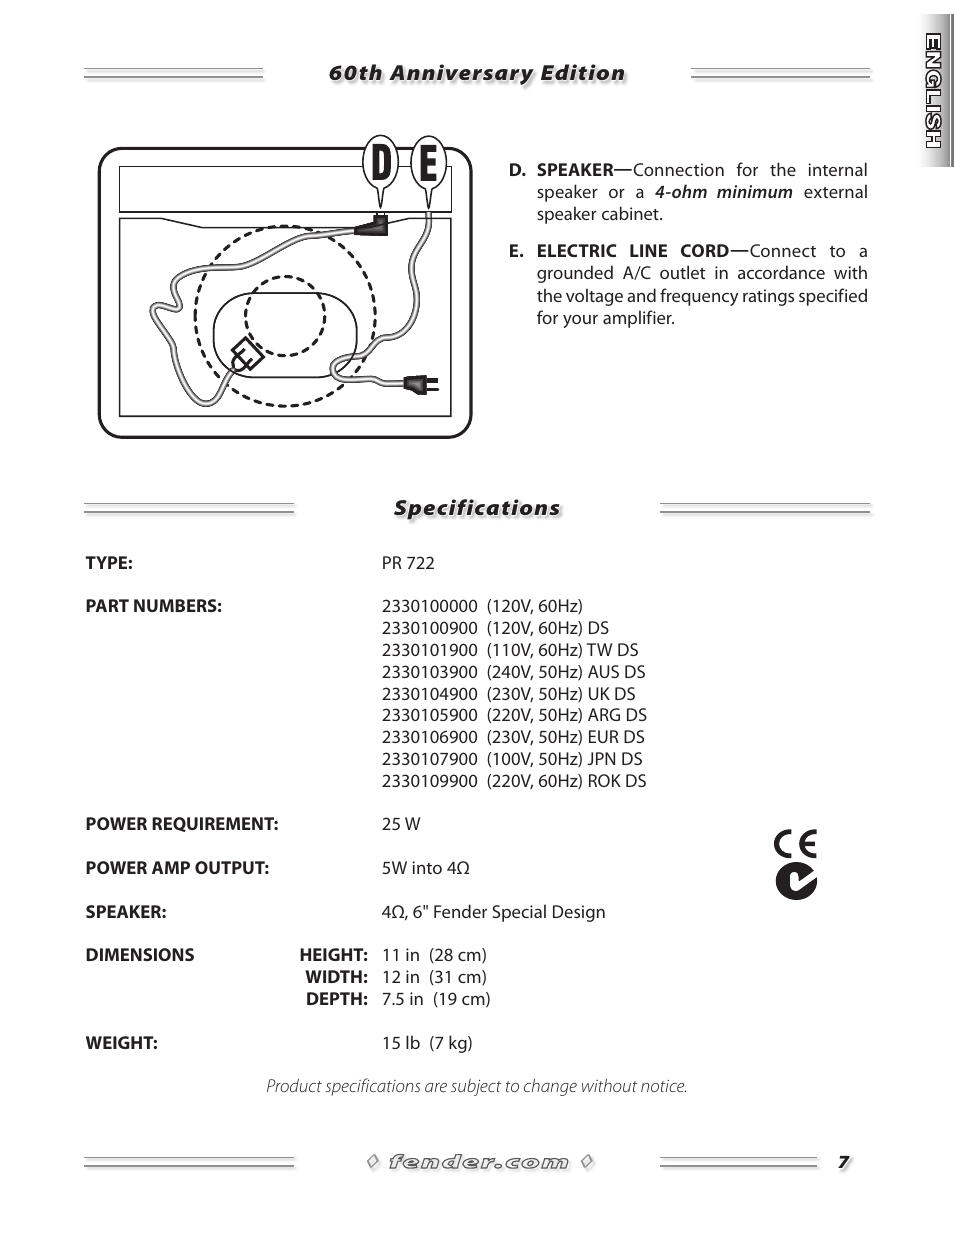 Fender Champion 600 User Manual | Page 7 / 20